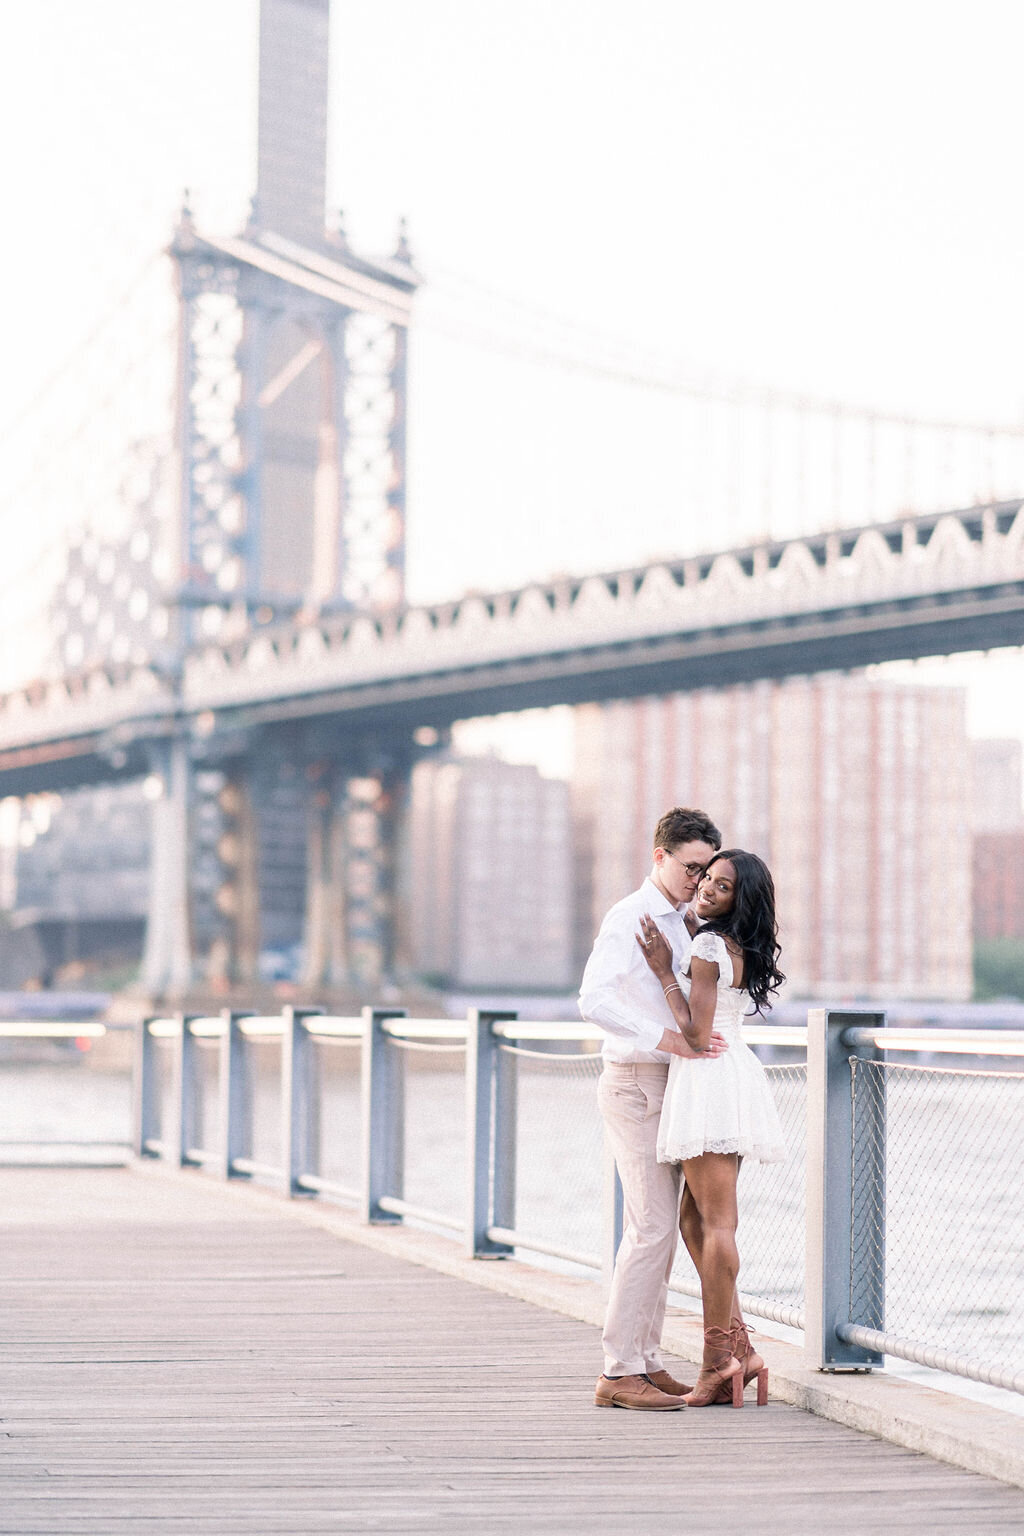 AllThingsJoyPhotography_TomMichelle_Engagement_HIGHRES-147